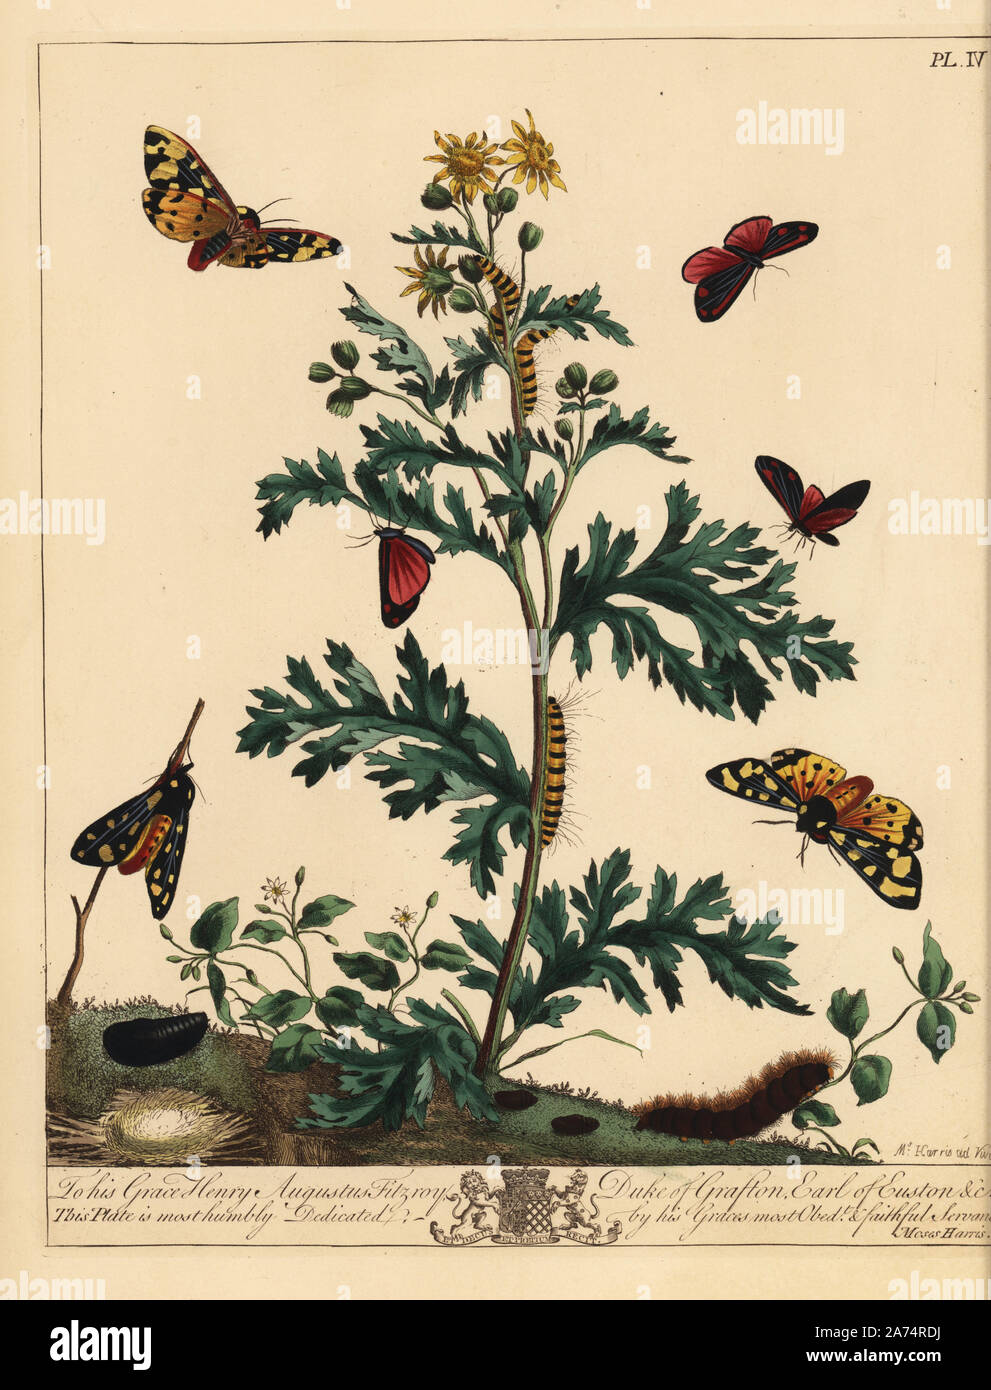 Cinnabar moth, Tyria jacobaeae, cream spot tiger moth, Epicallia villica, and eyed hawkmoth, Smerinthus ocellatus, on a ragwort plant, Jacobaea vulgaris. Moses Harris based his illustration on Jacob l'Admiral's. Handcoloured lithograph after an illustration by Moses Harris from 'The Aurelian; a Natural History of English Moths and Butterflies,' new edition edited by J. O. Westwood, published by Henry Bohn, London, 1840. Stock Photo